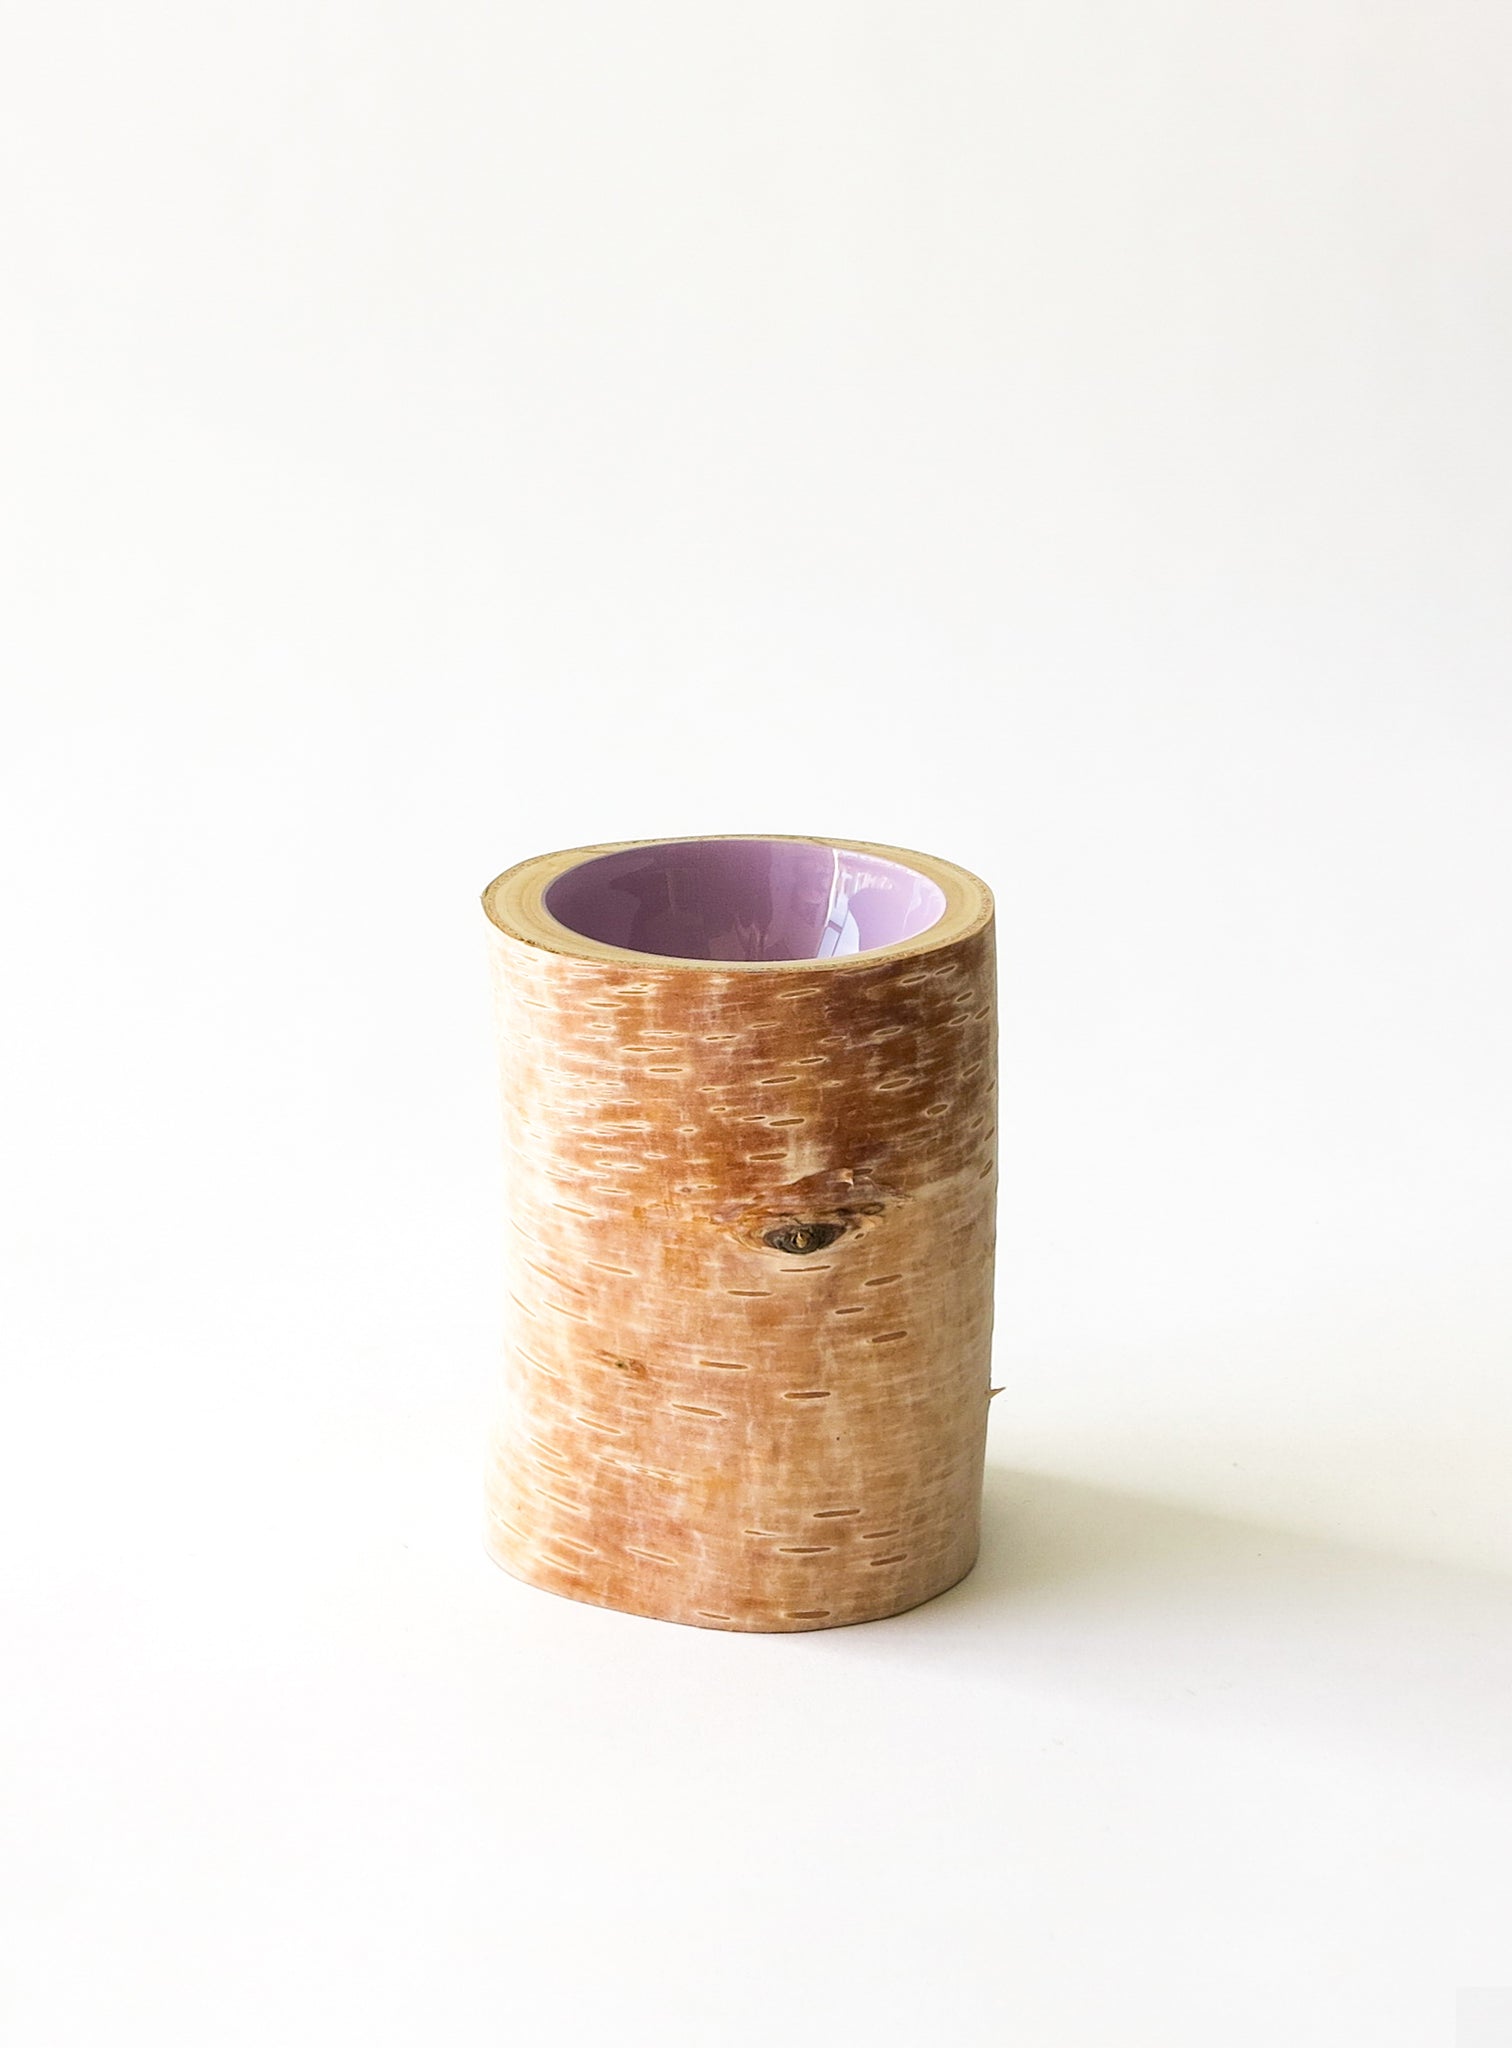 Size 2 Log Bowl - extra small wooden bowl with papery birch bark, glossy interior is a light lilac purple colour.